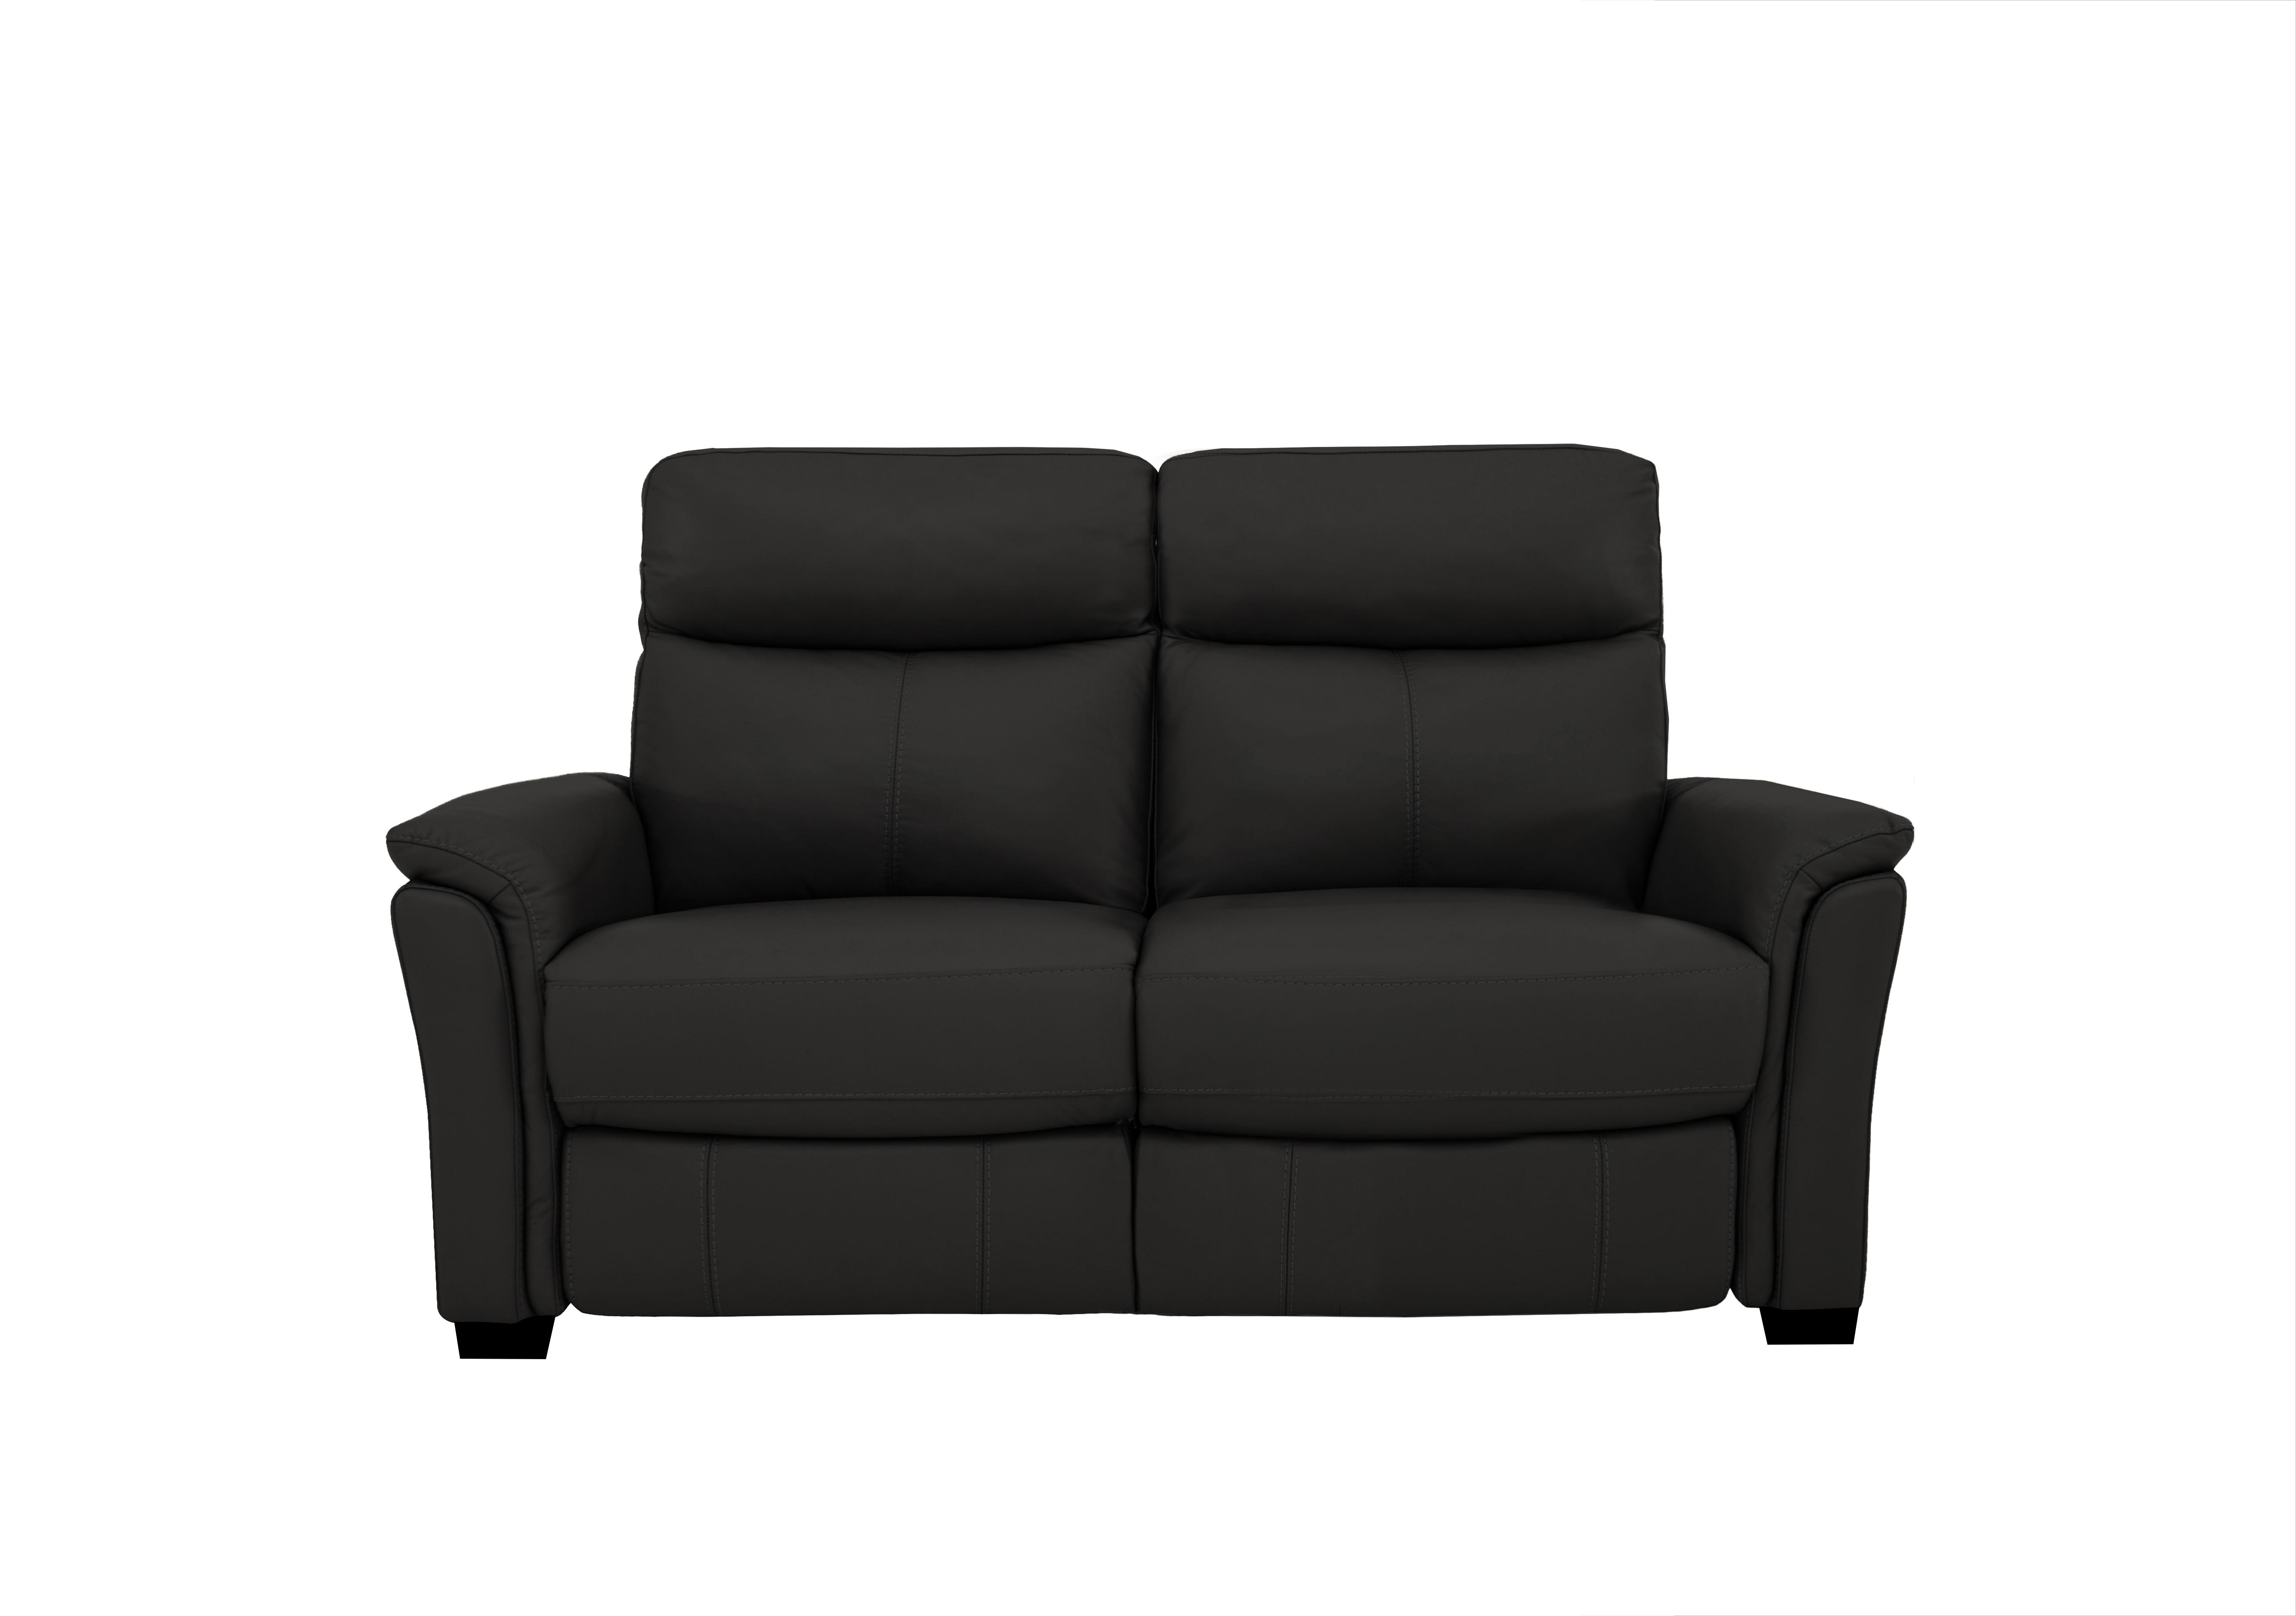 Compact Collection Piccolo 2 Seater Leather Static Sofa in Bv-3500 Classic Black on Furniture Village